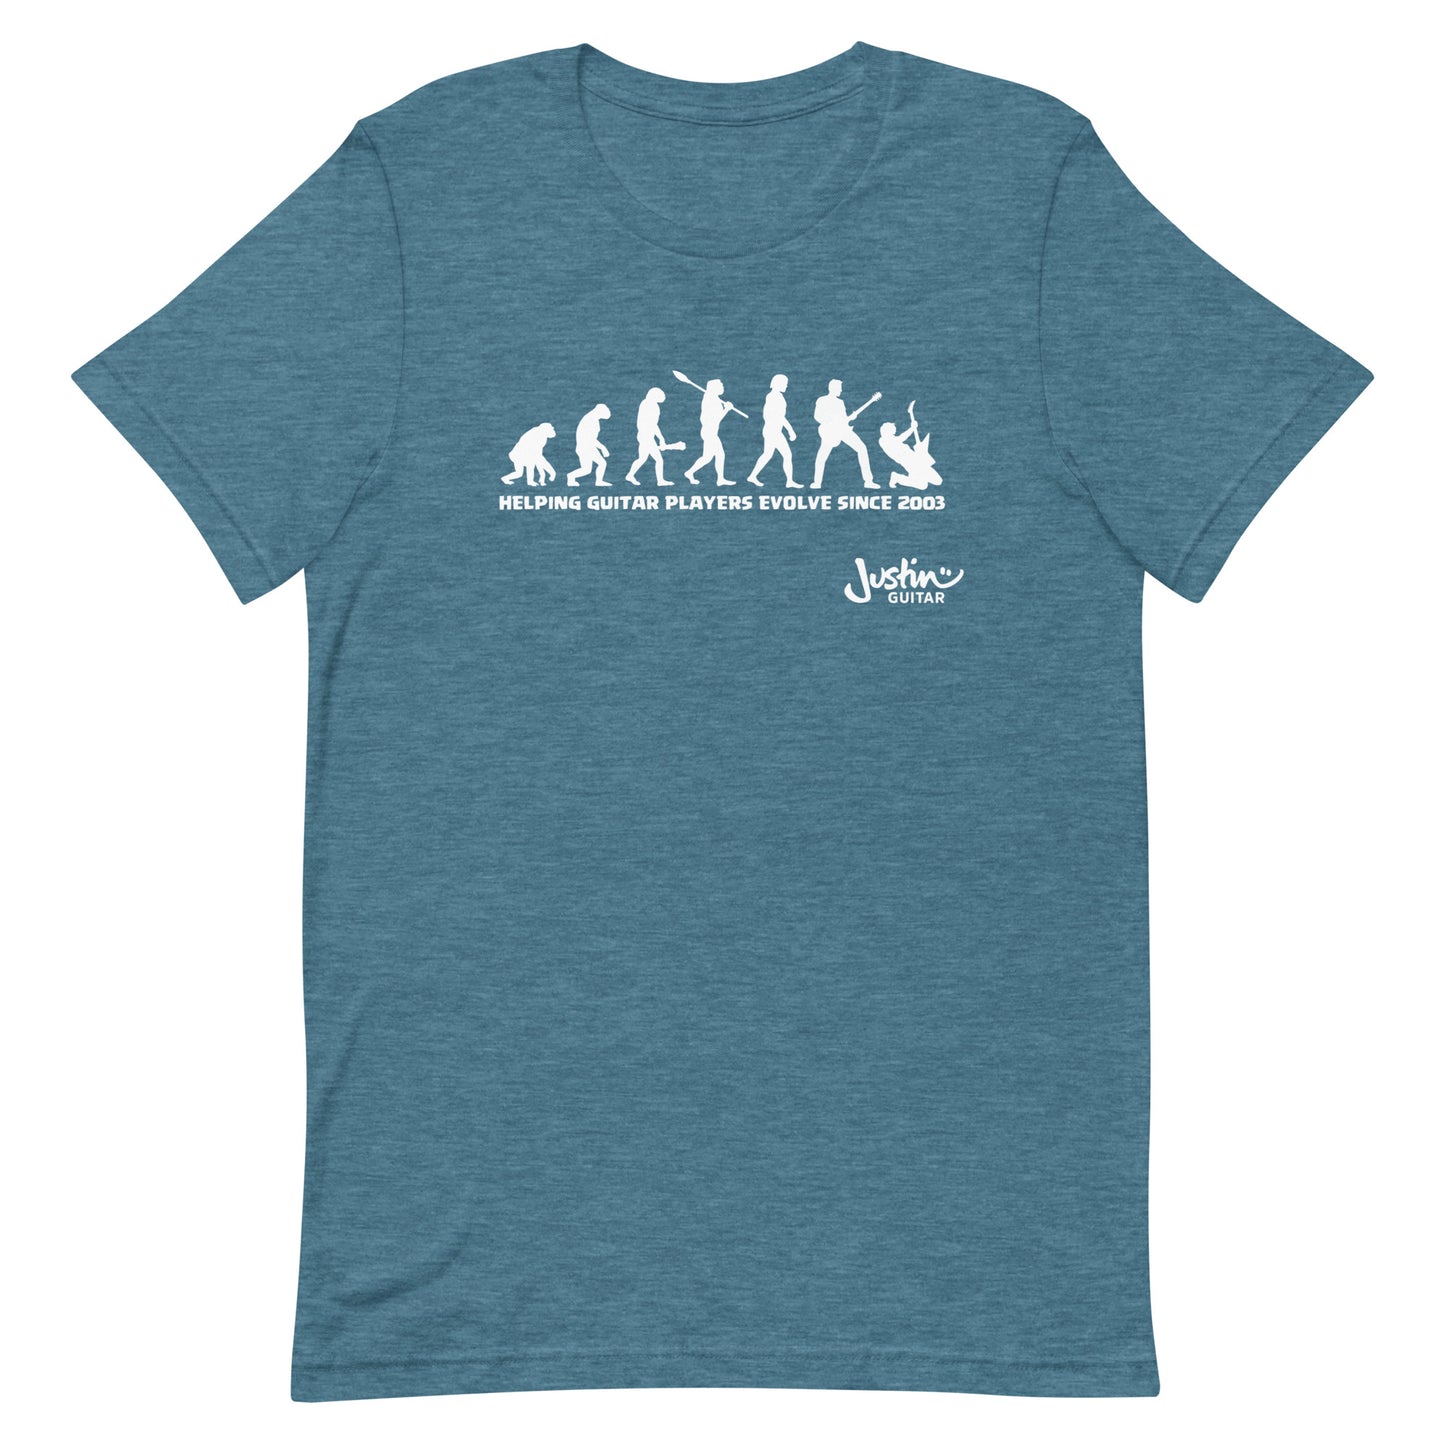 Deep teal Tshirt with funny design of evolving guitar players through time. 